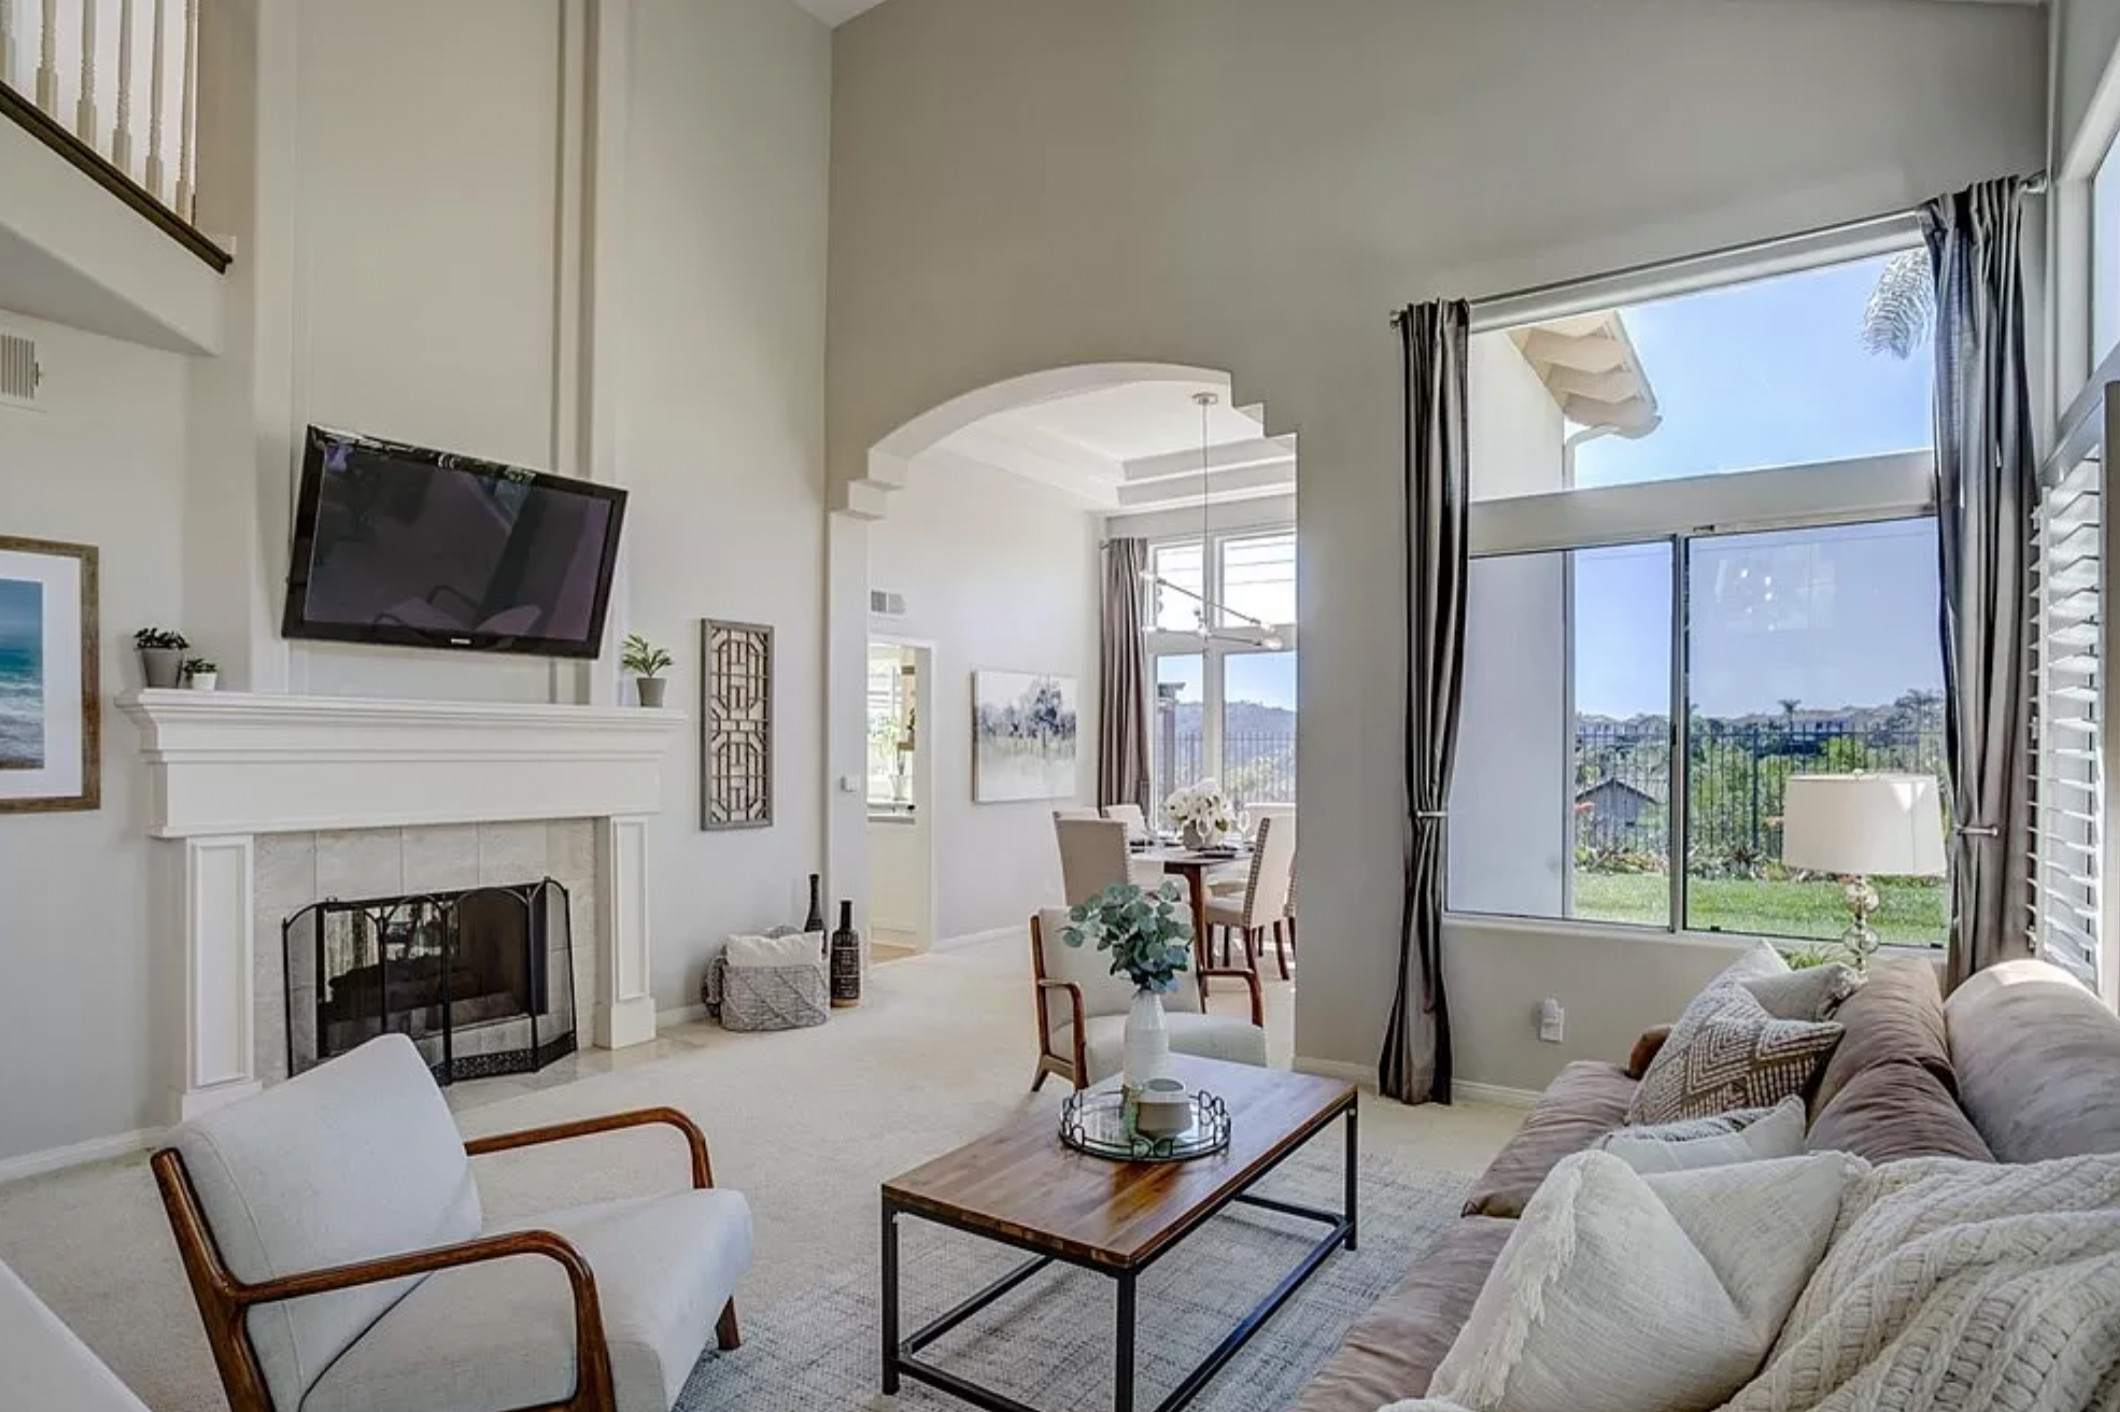 Carlsbad CA Home staging 2-22